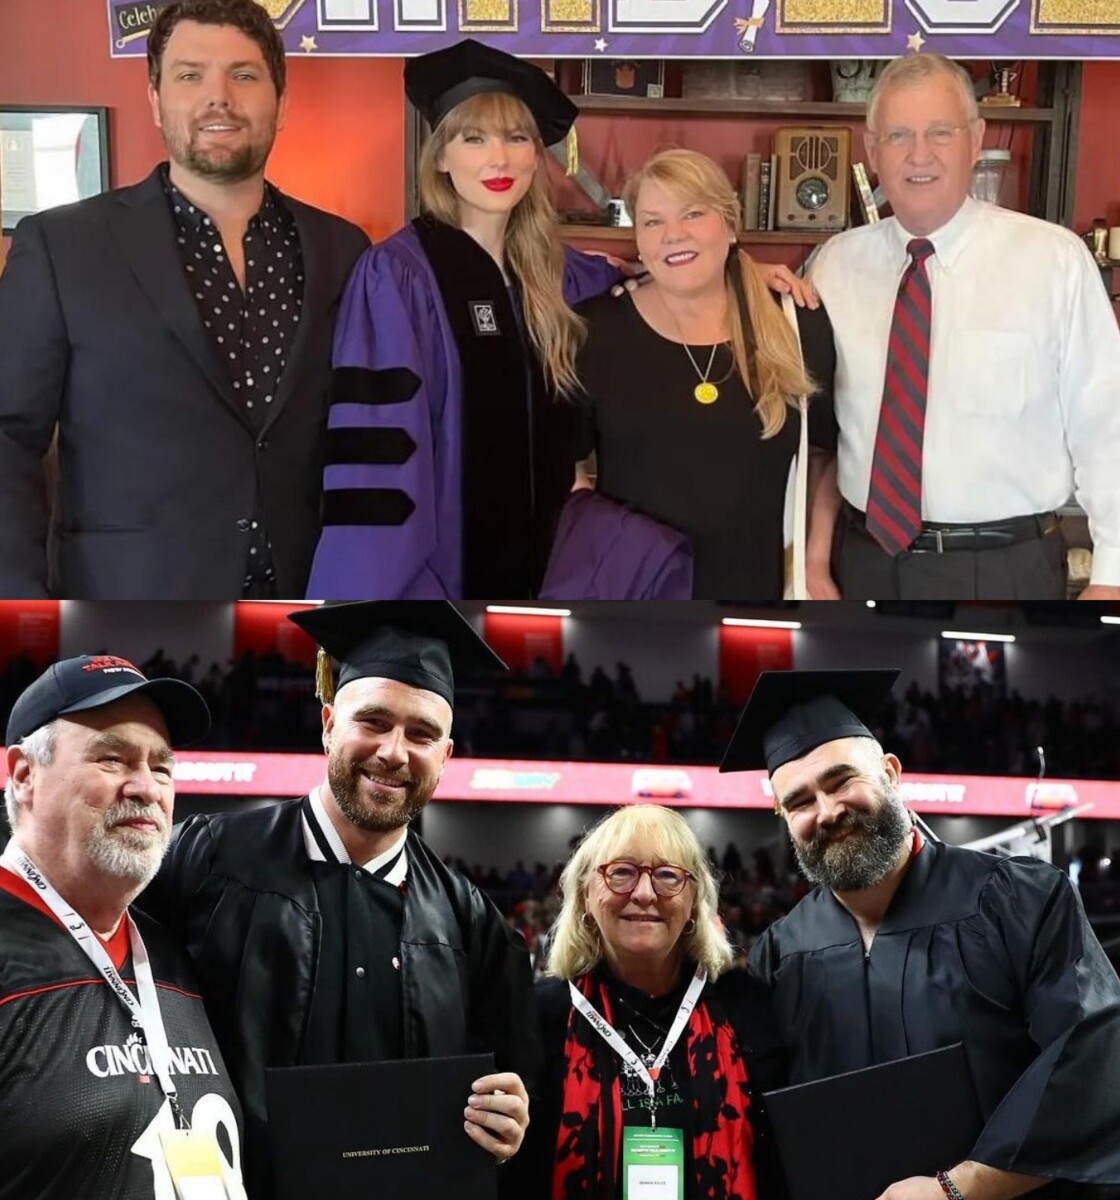 Brothers Jason and Travis Kelce Receive Support from Father Ed and Mother Donna for Surprise Graduation Ceremony in Cincinnati